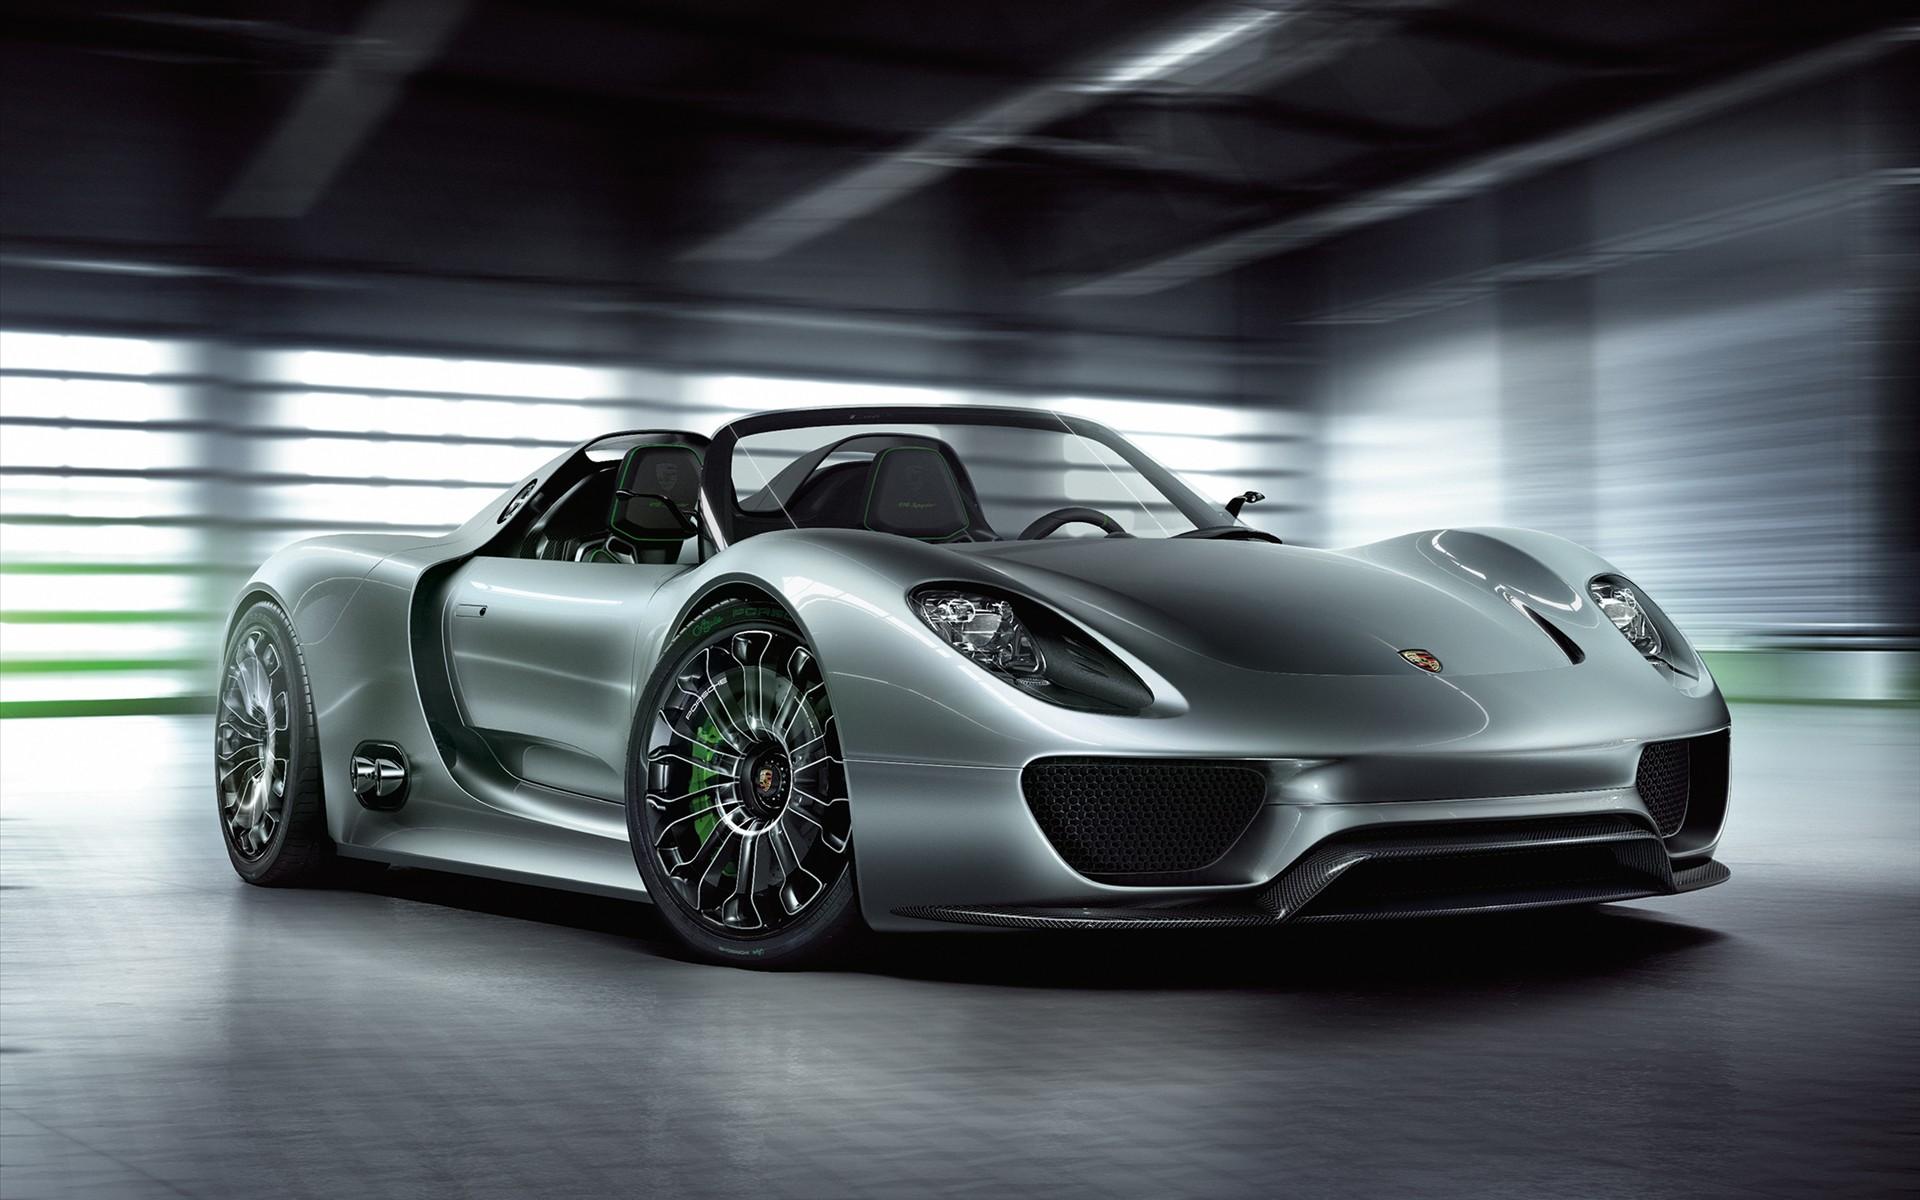 Daily Wallpaper: Porsche 918 Spyder Wallpaper. I Like To Waste My Time